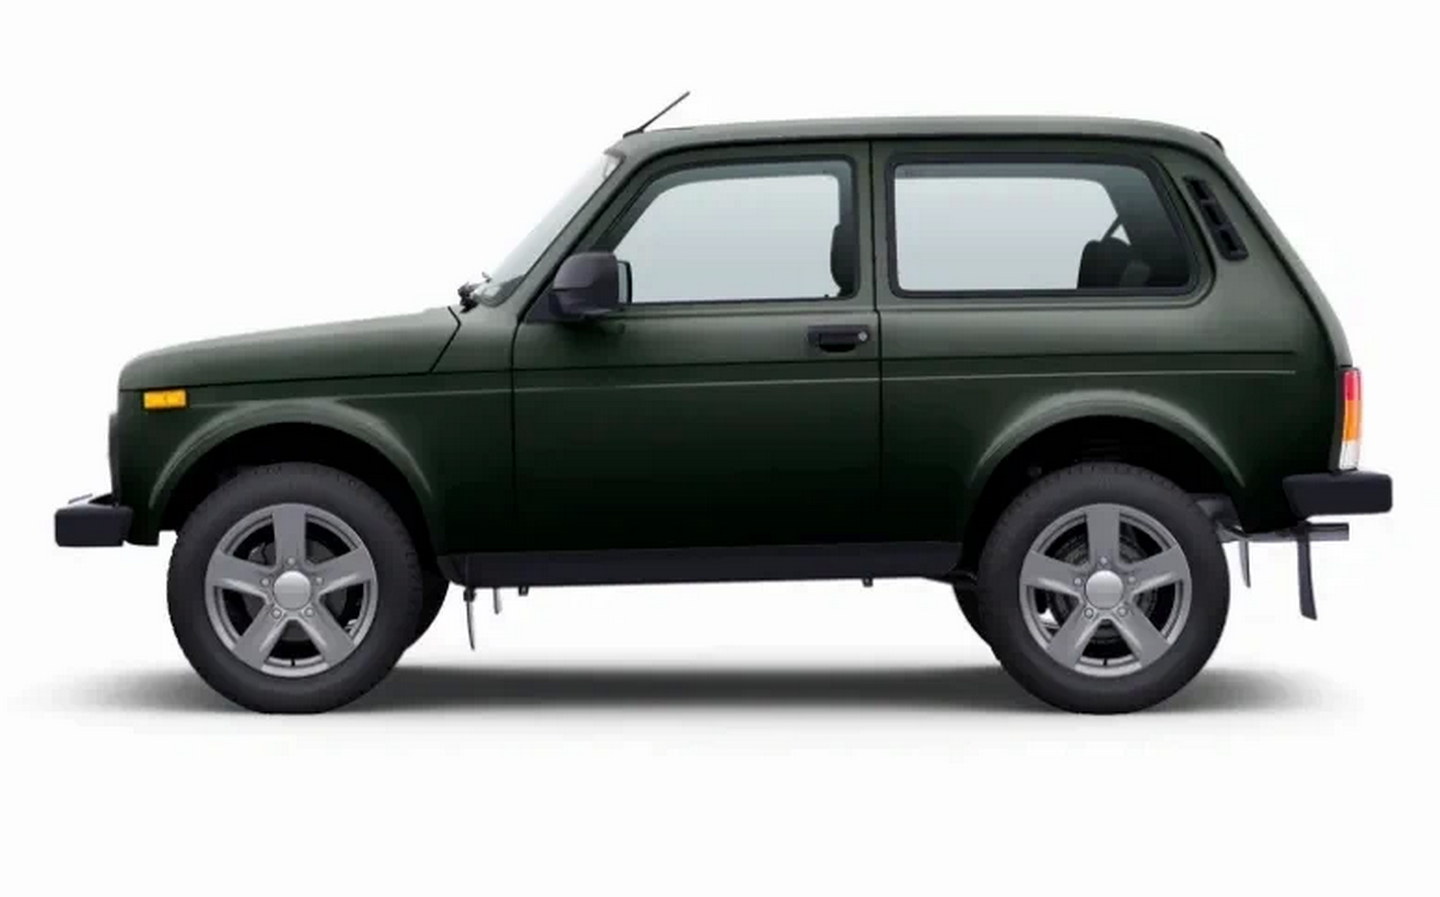 The current Lada Niva, in production until 2023